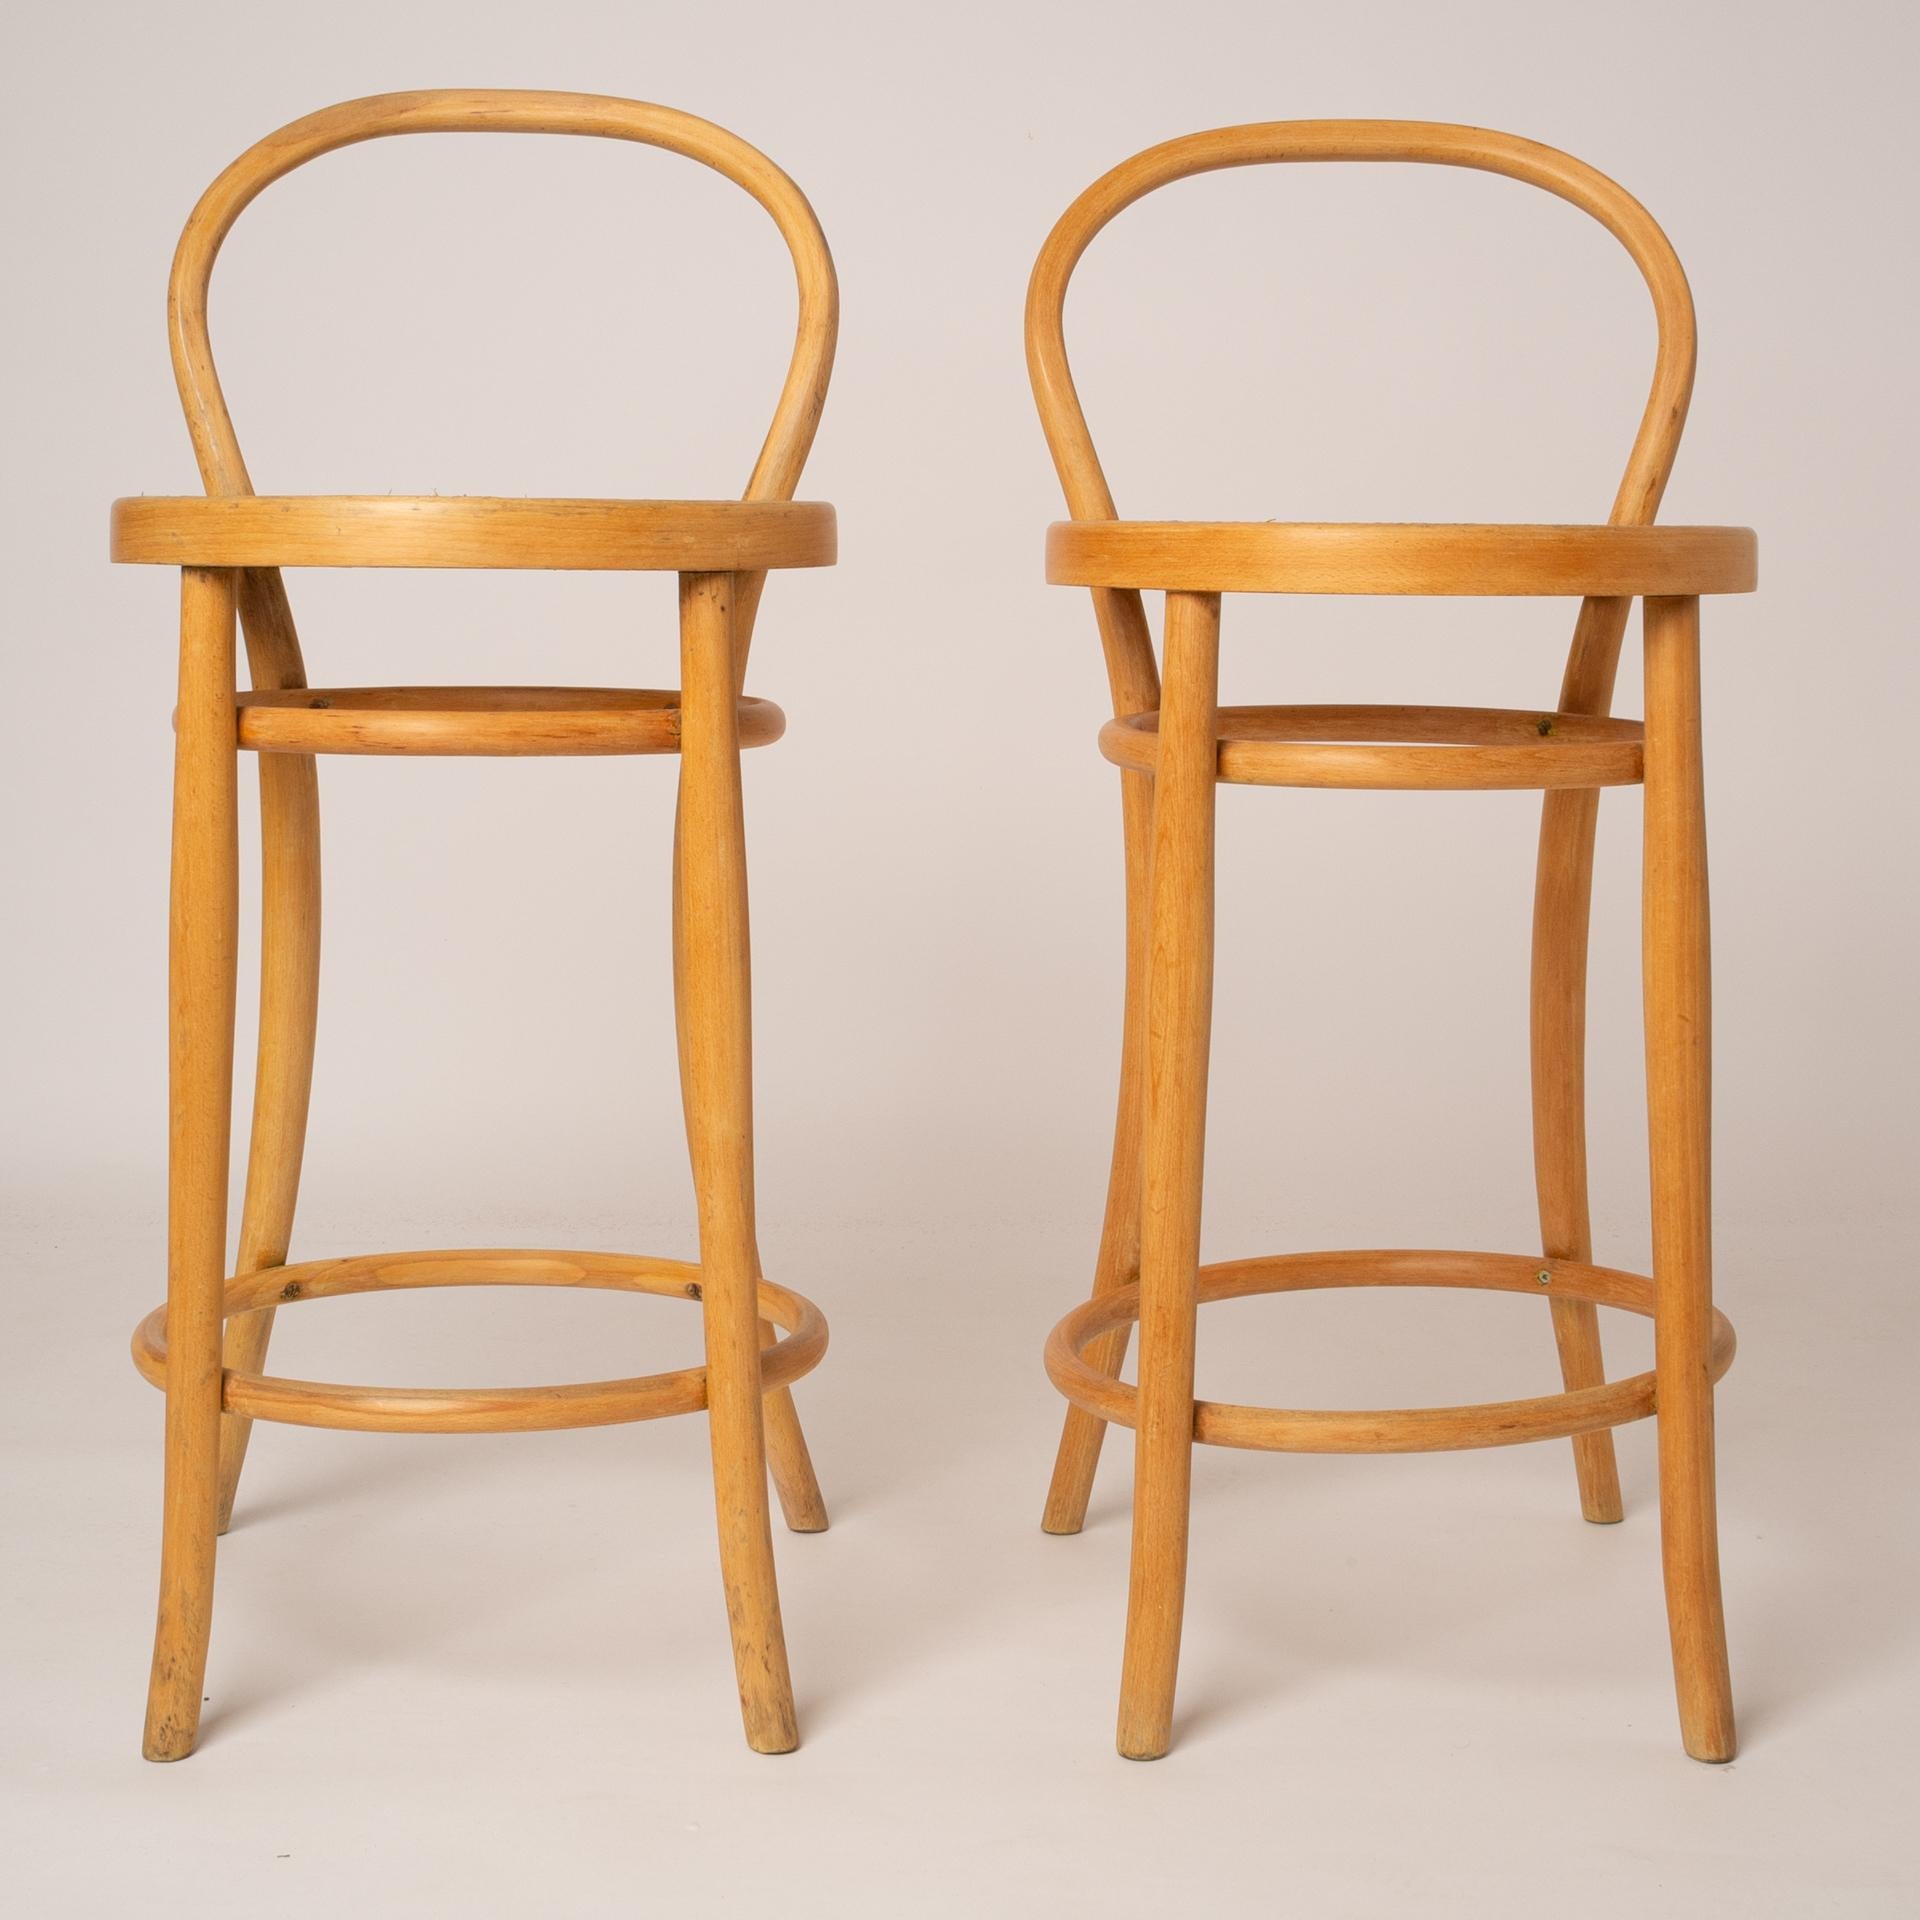 M/1957 -  Rare pair of Italian high bar stools with backrest, in sturdy beech wood and Vienna straw seat, perfect.
Just cleaned, without any paint.  With a good price also.